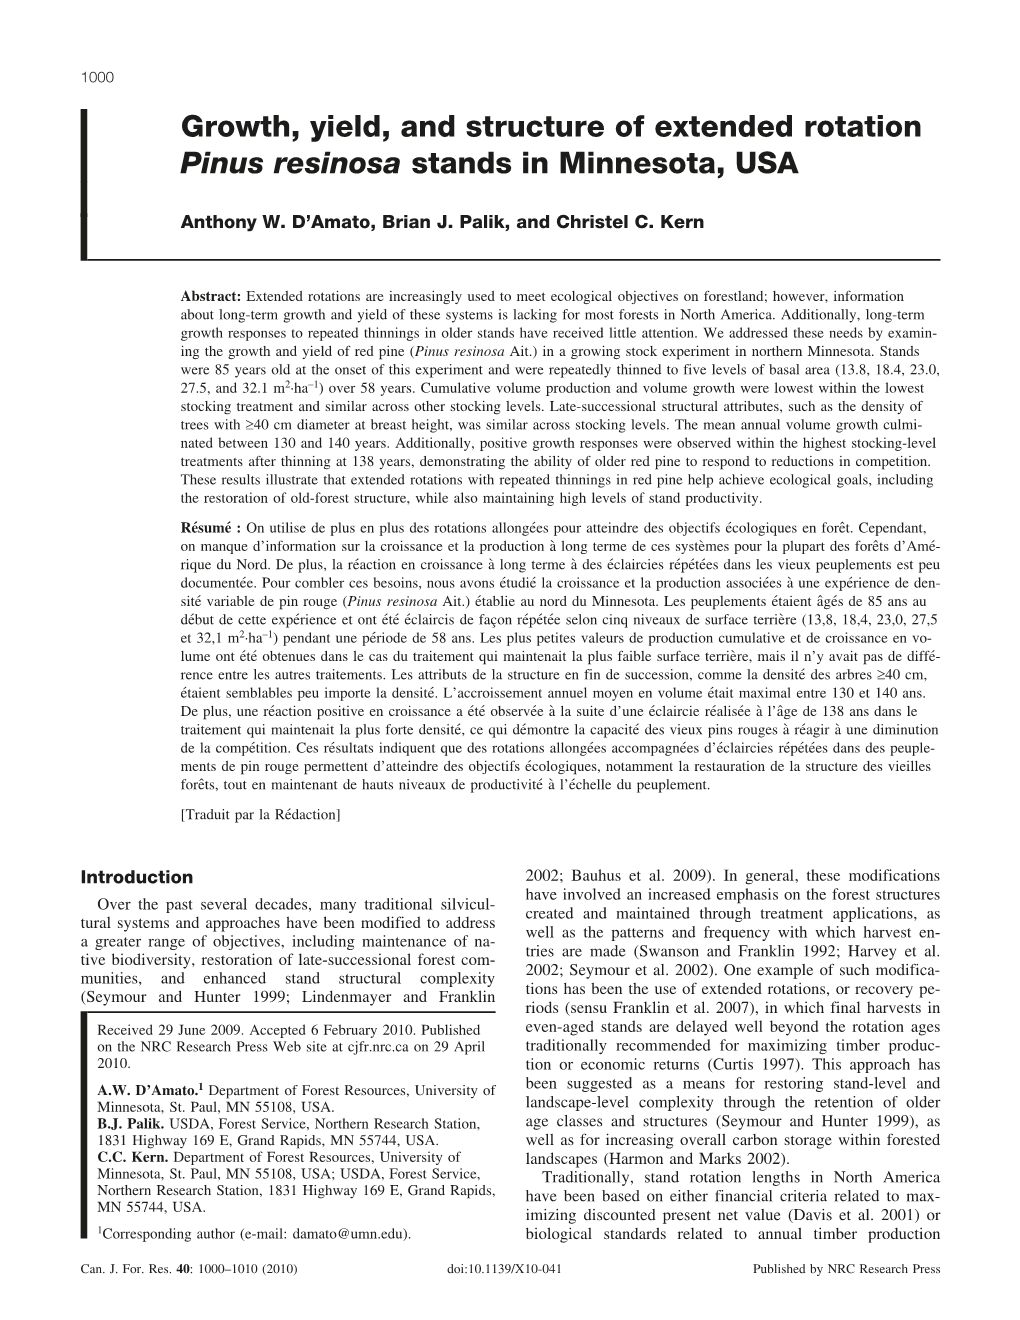 Growth, Yield, and Structure of Extended Rotation Pinus Resinosa Stands in Minnesota, USA